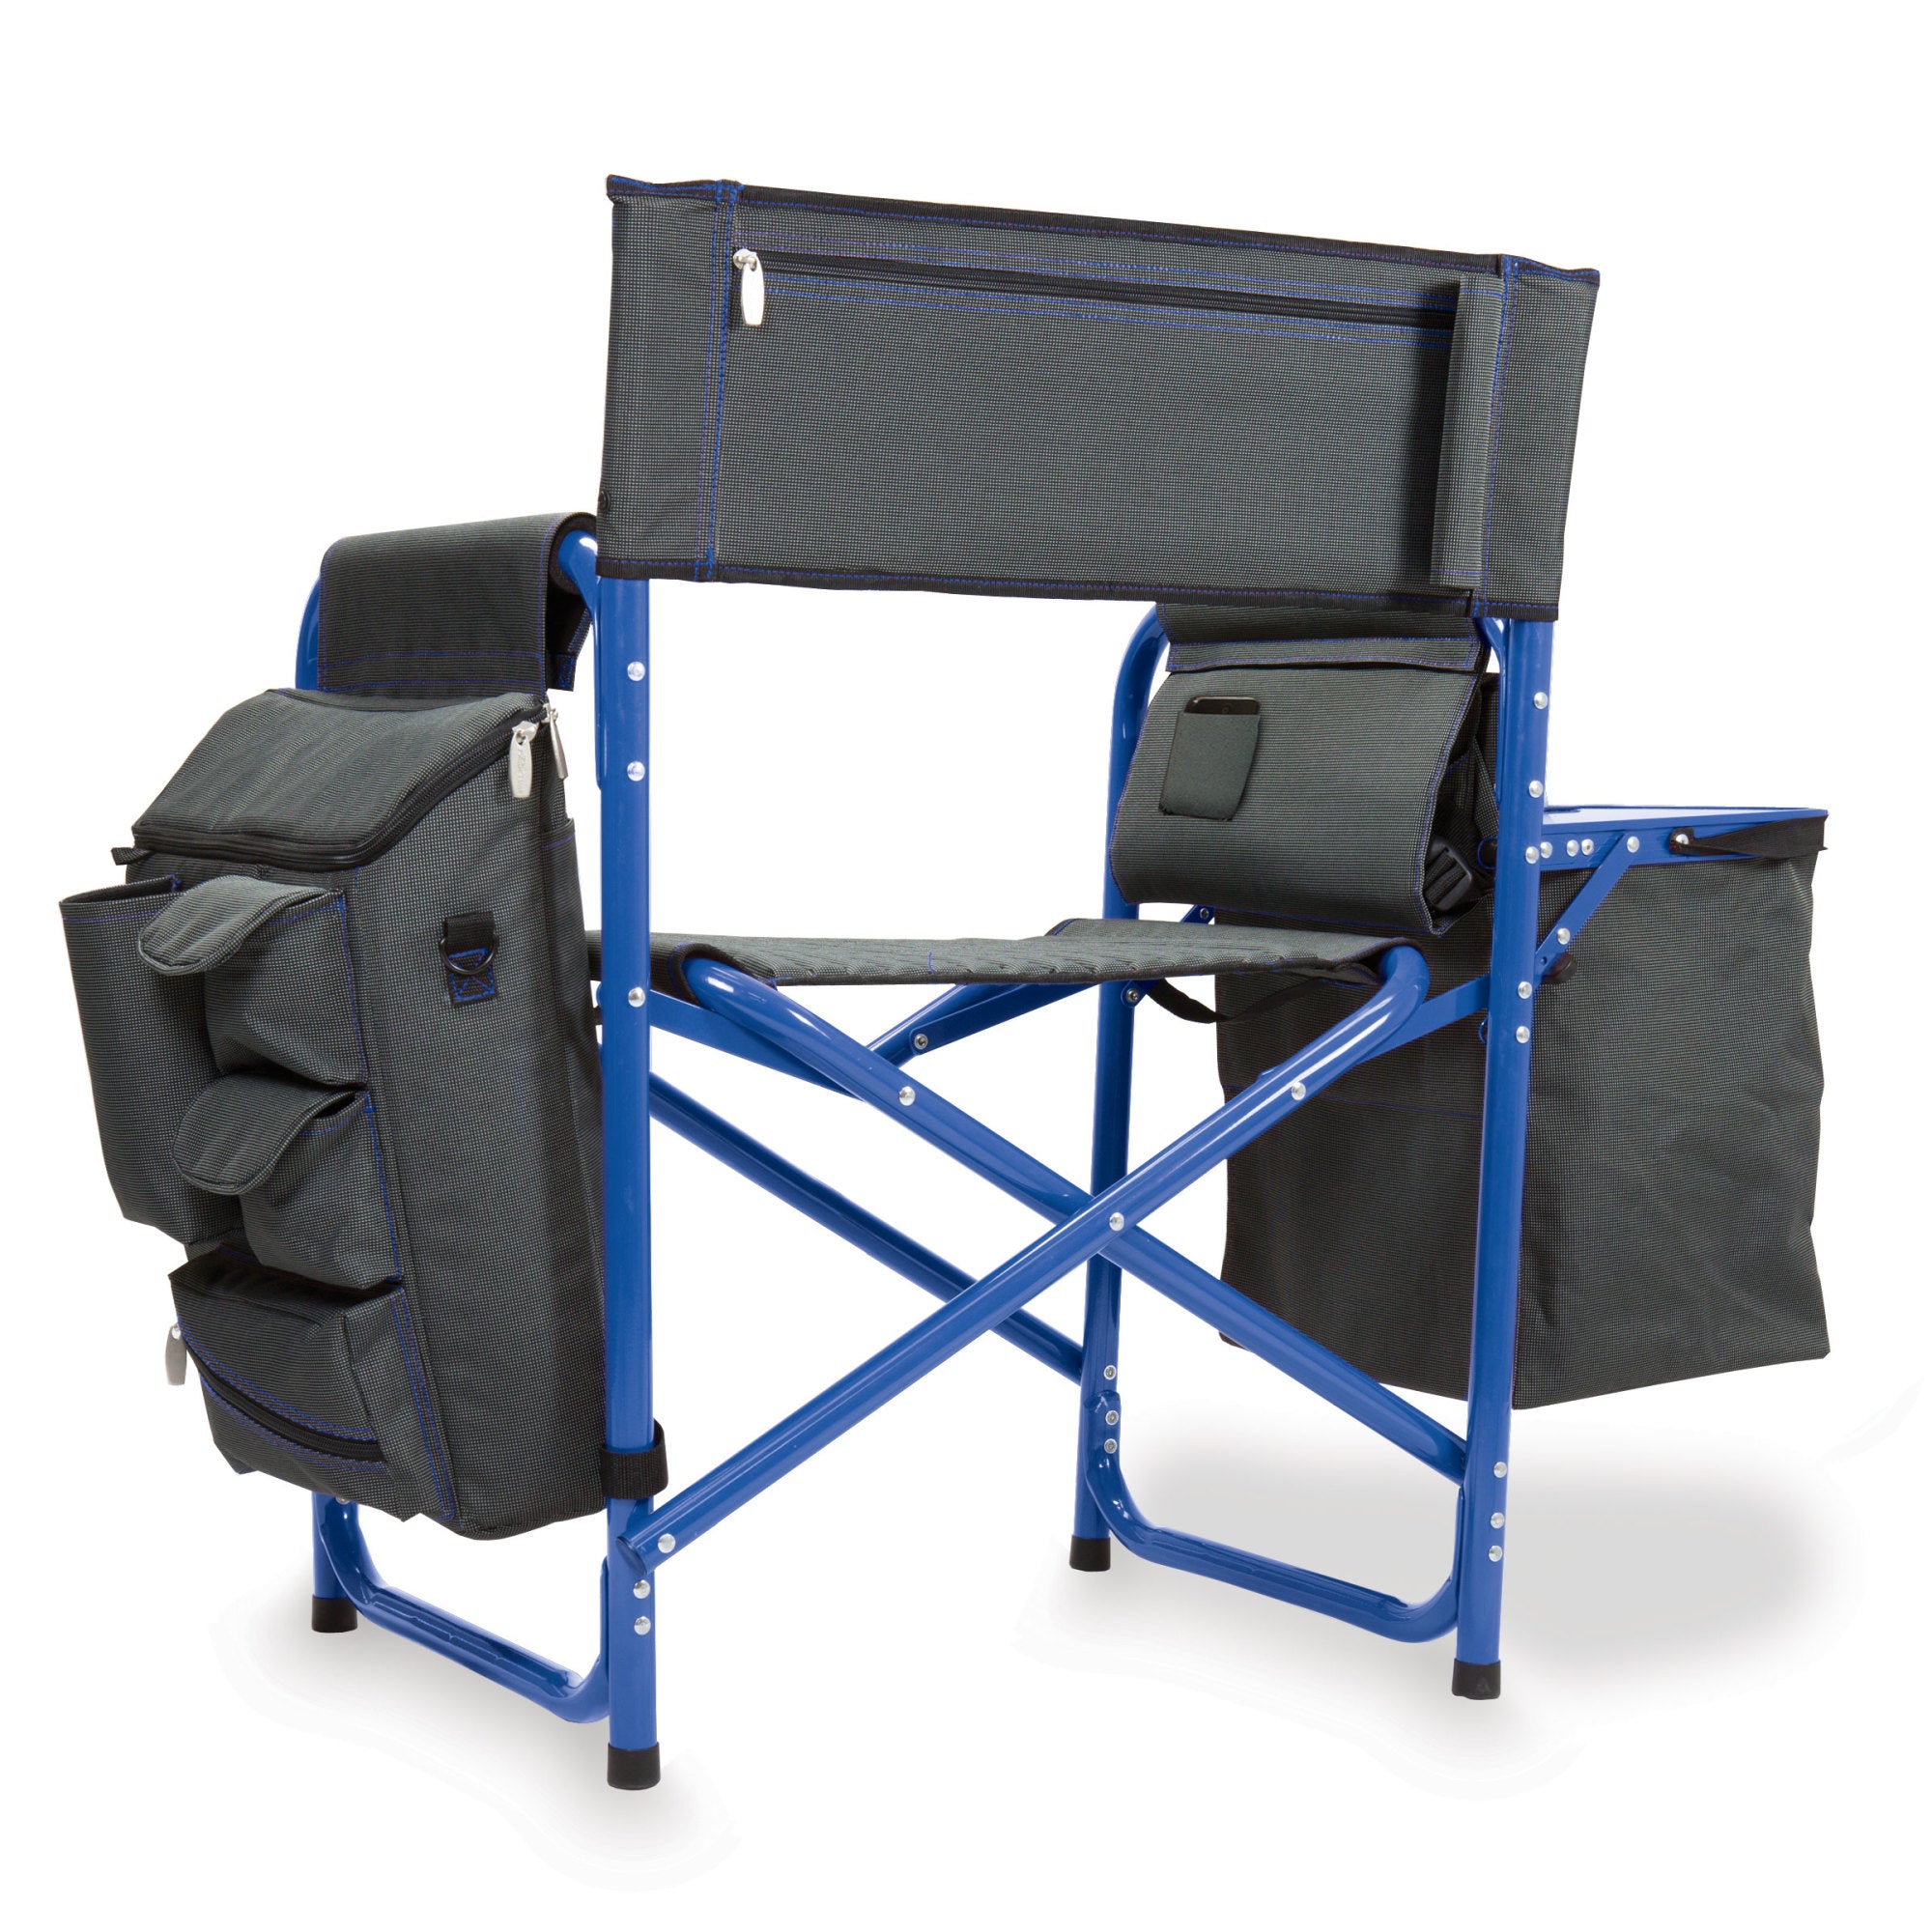 Pittsburgh Panthers - Fusion Camping Chair